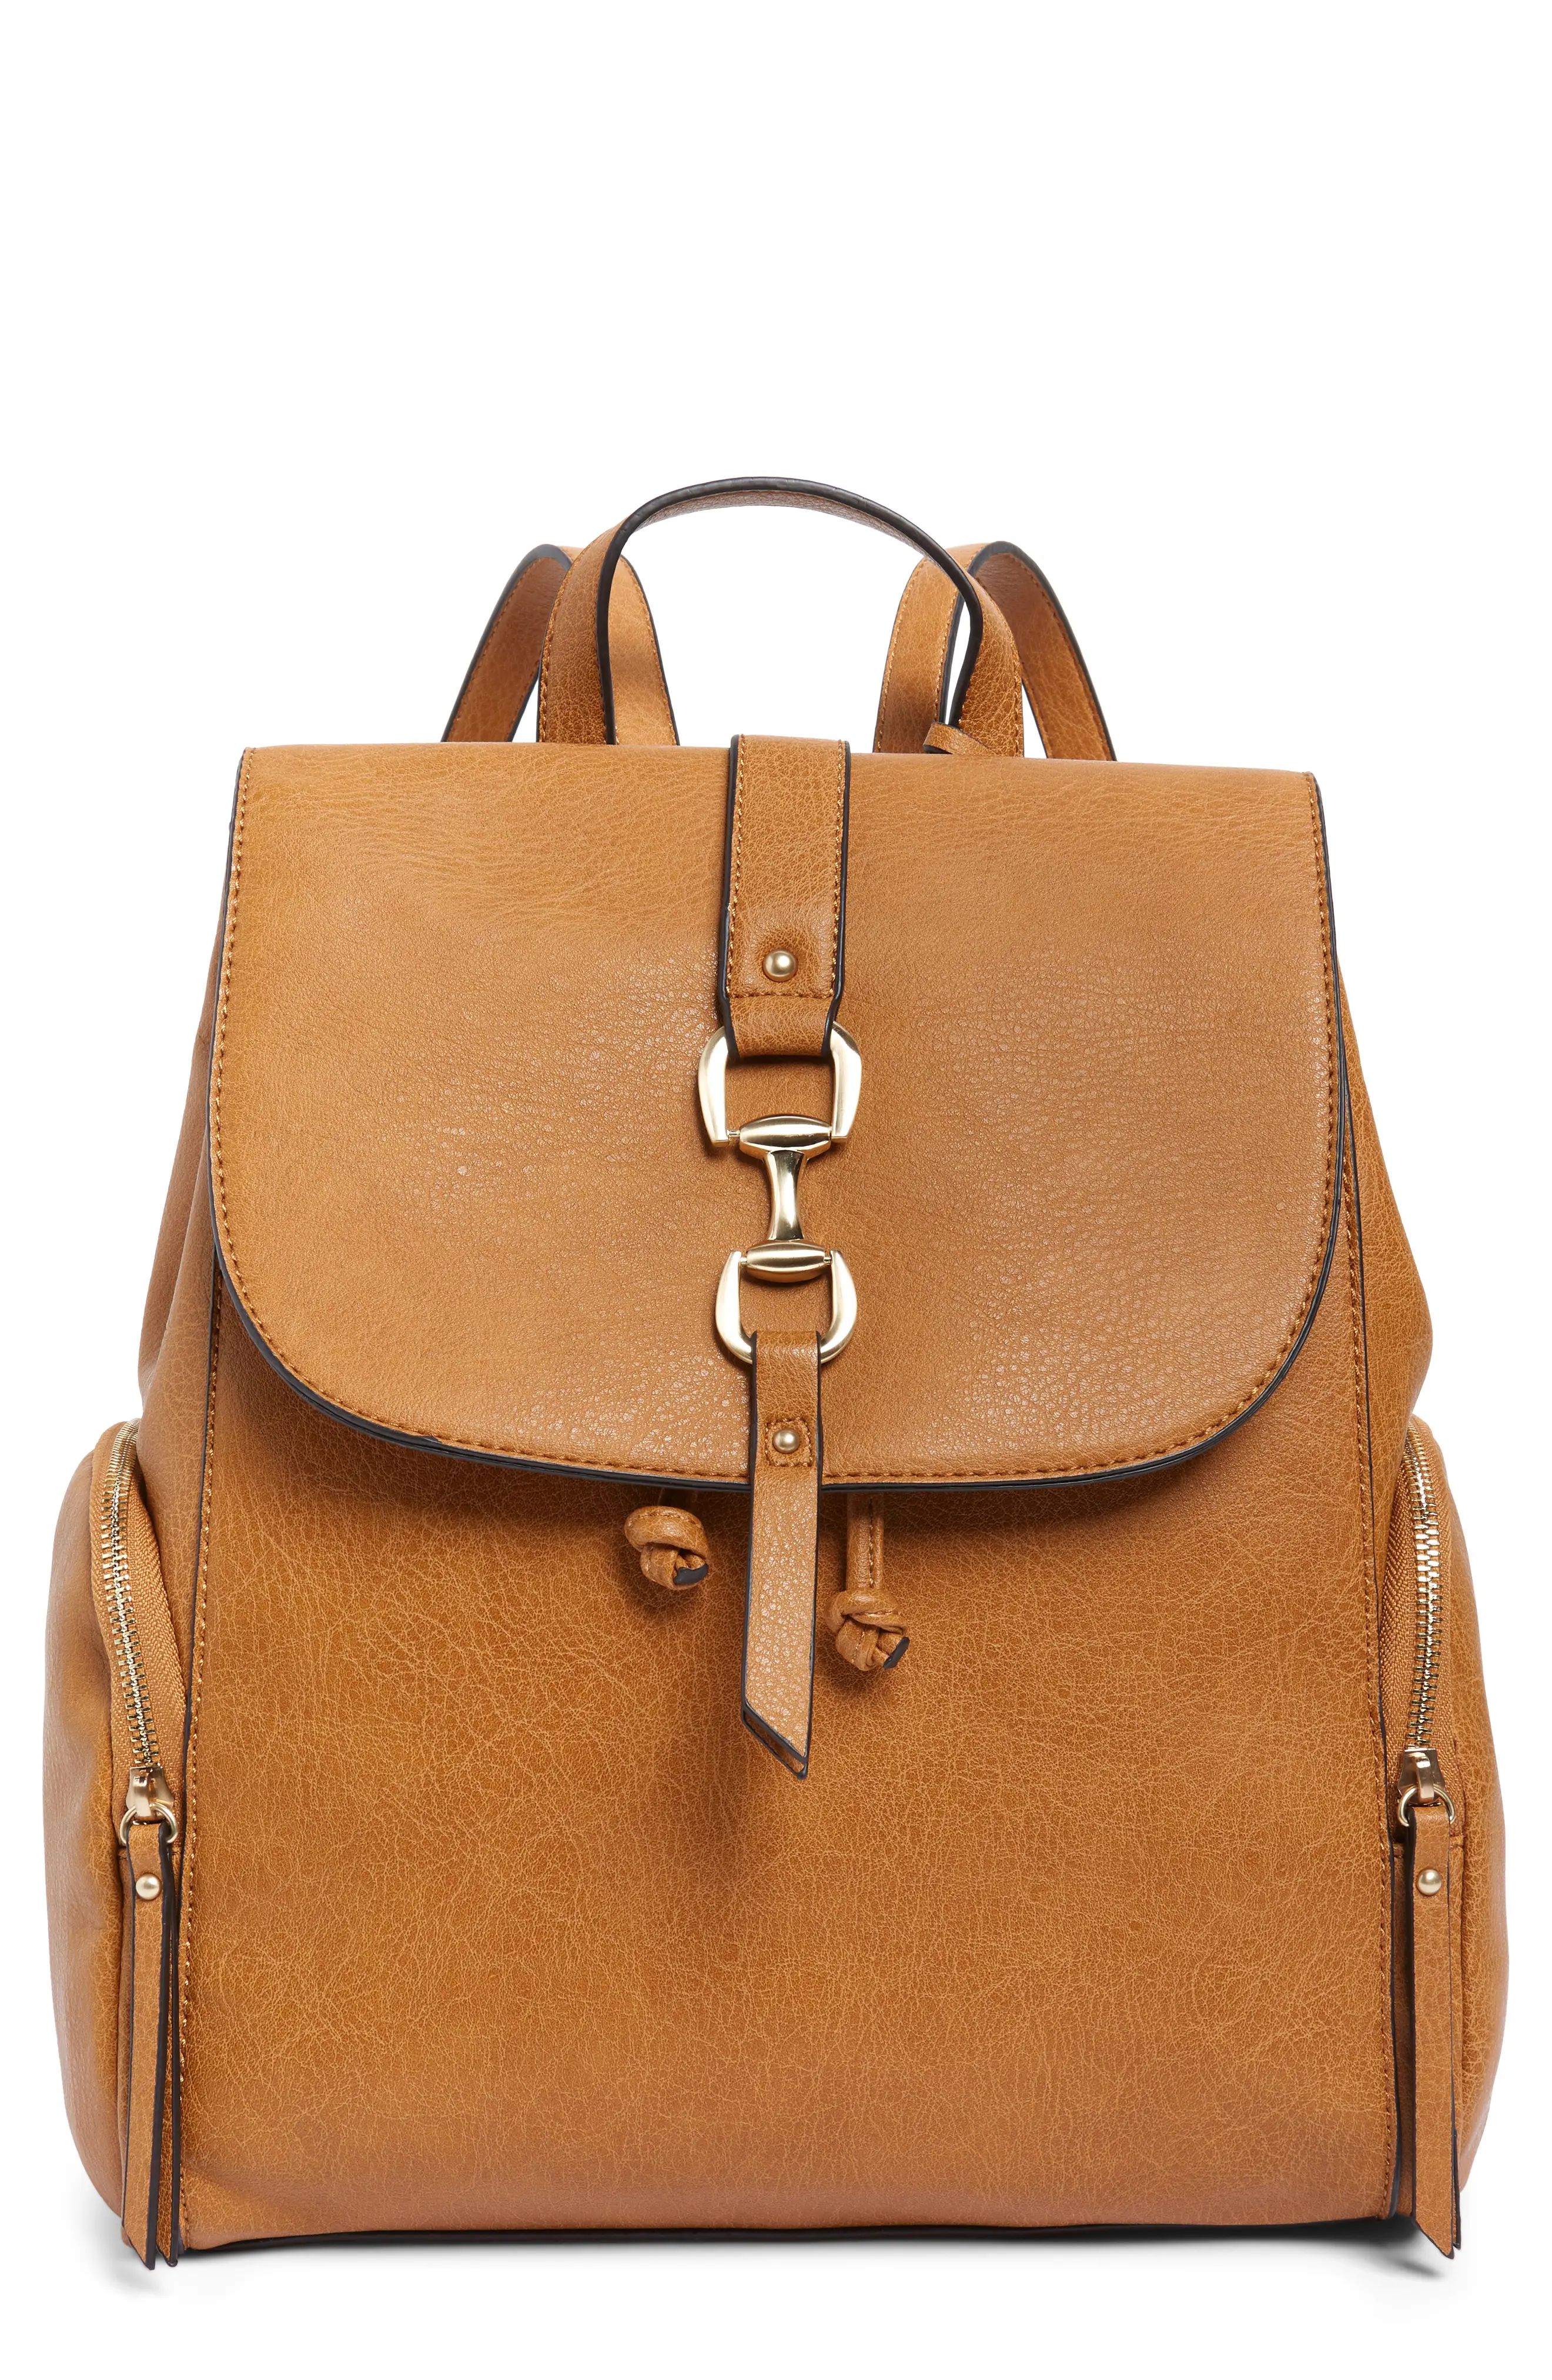 Sole Society Marah Faux Leather Backpack - Brown | Nordstrom